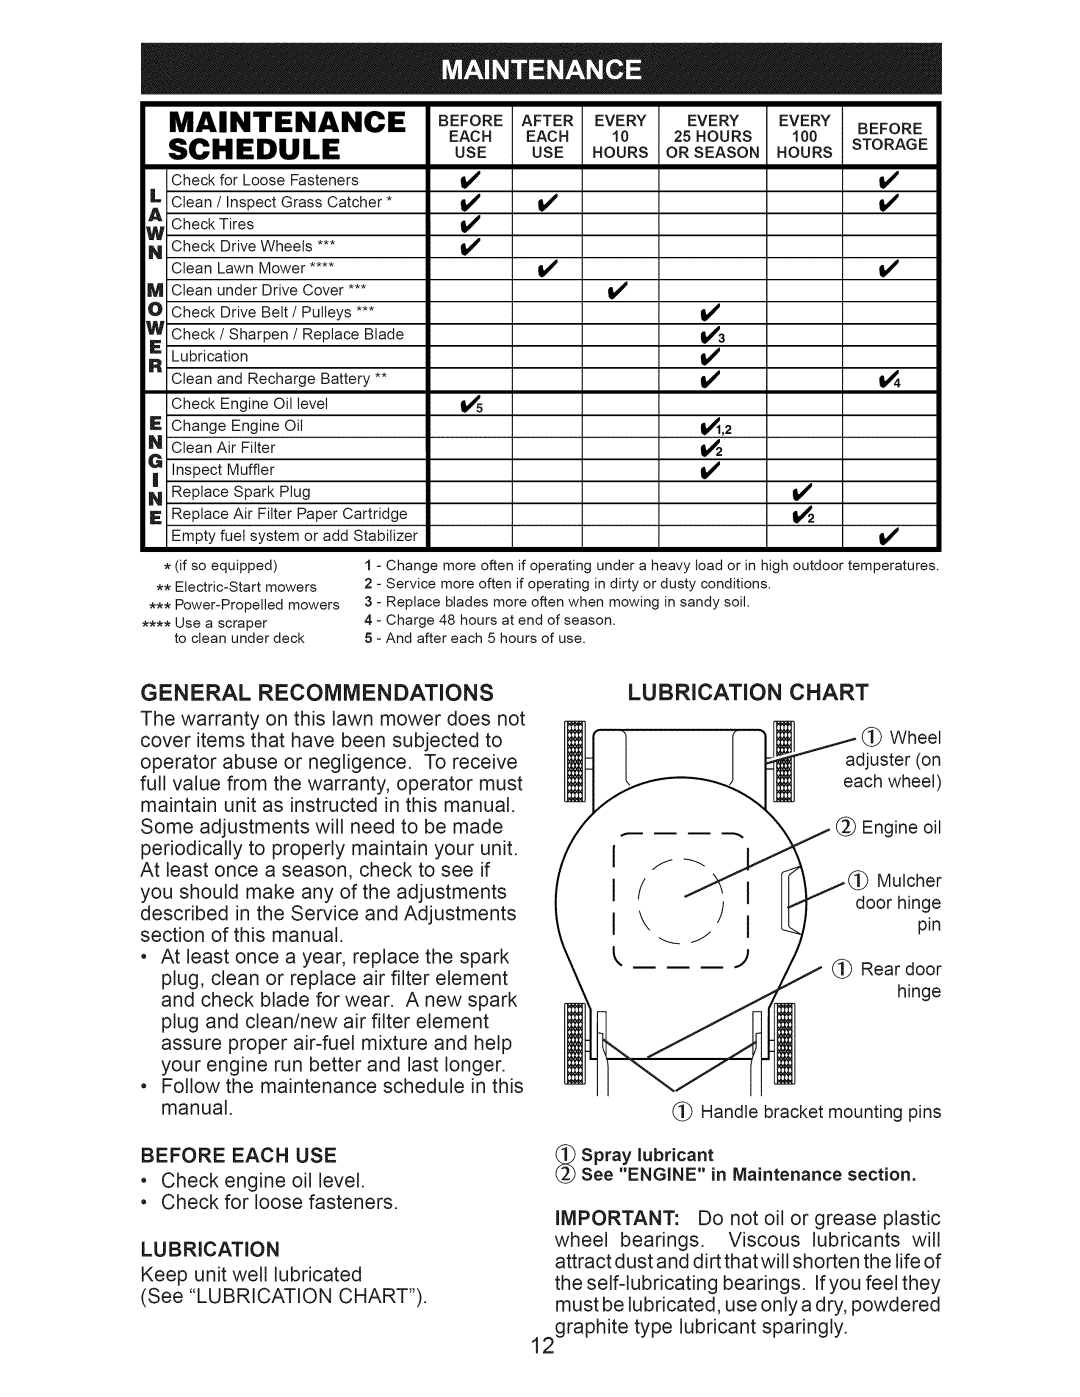 Craftsman 917.376401 owner manual Maintenance, Schedule, Use Hours 